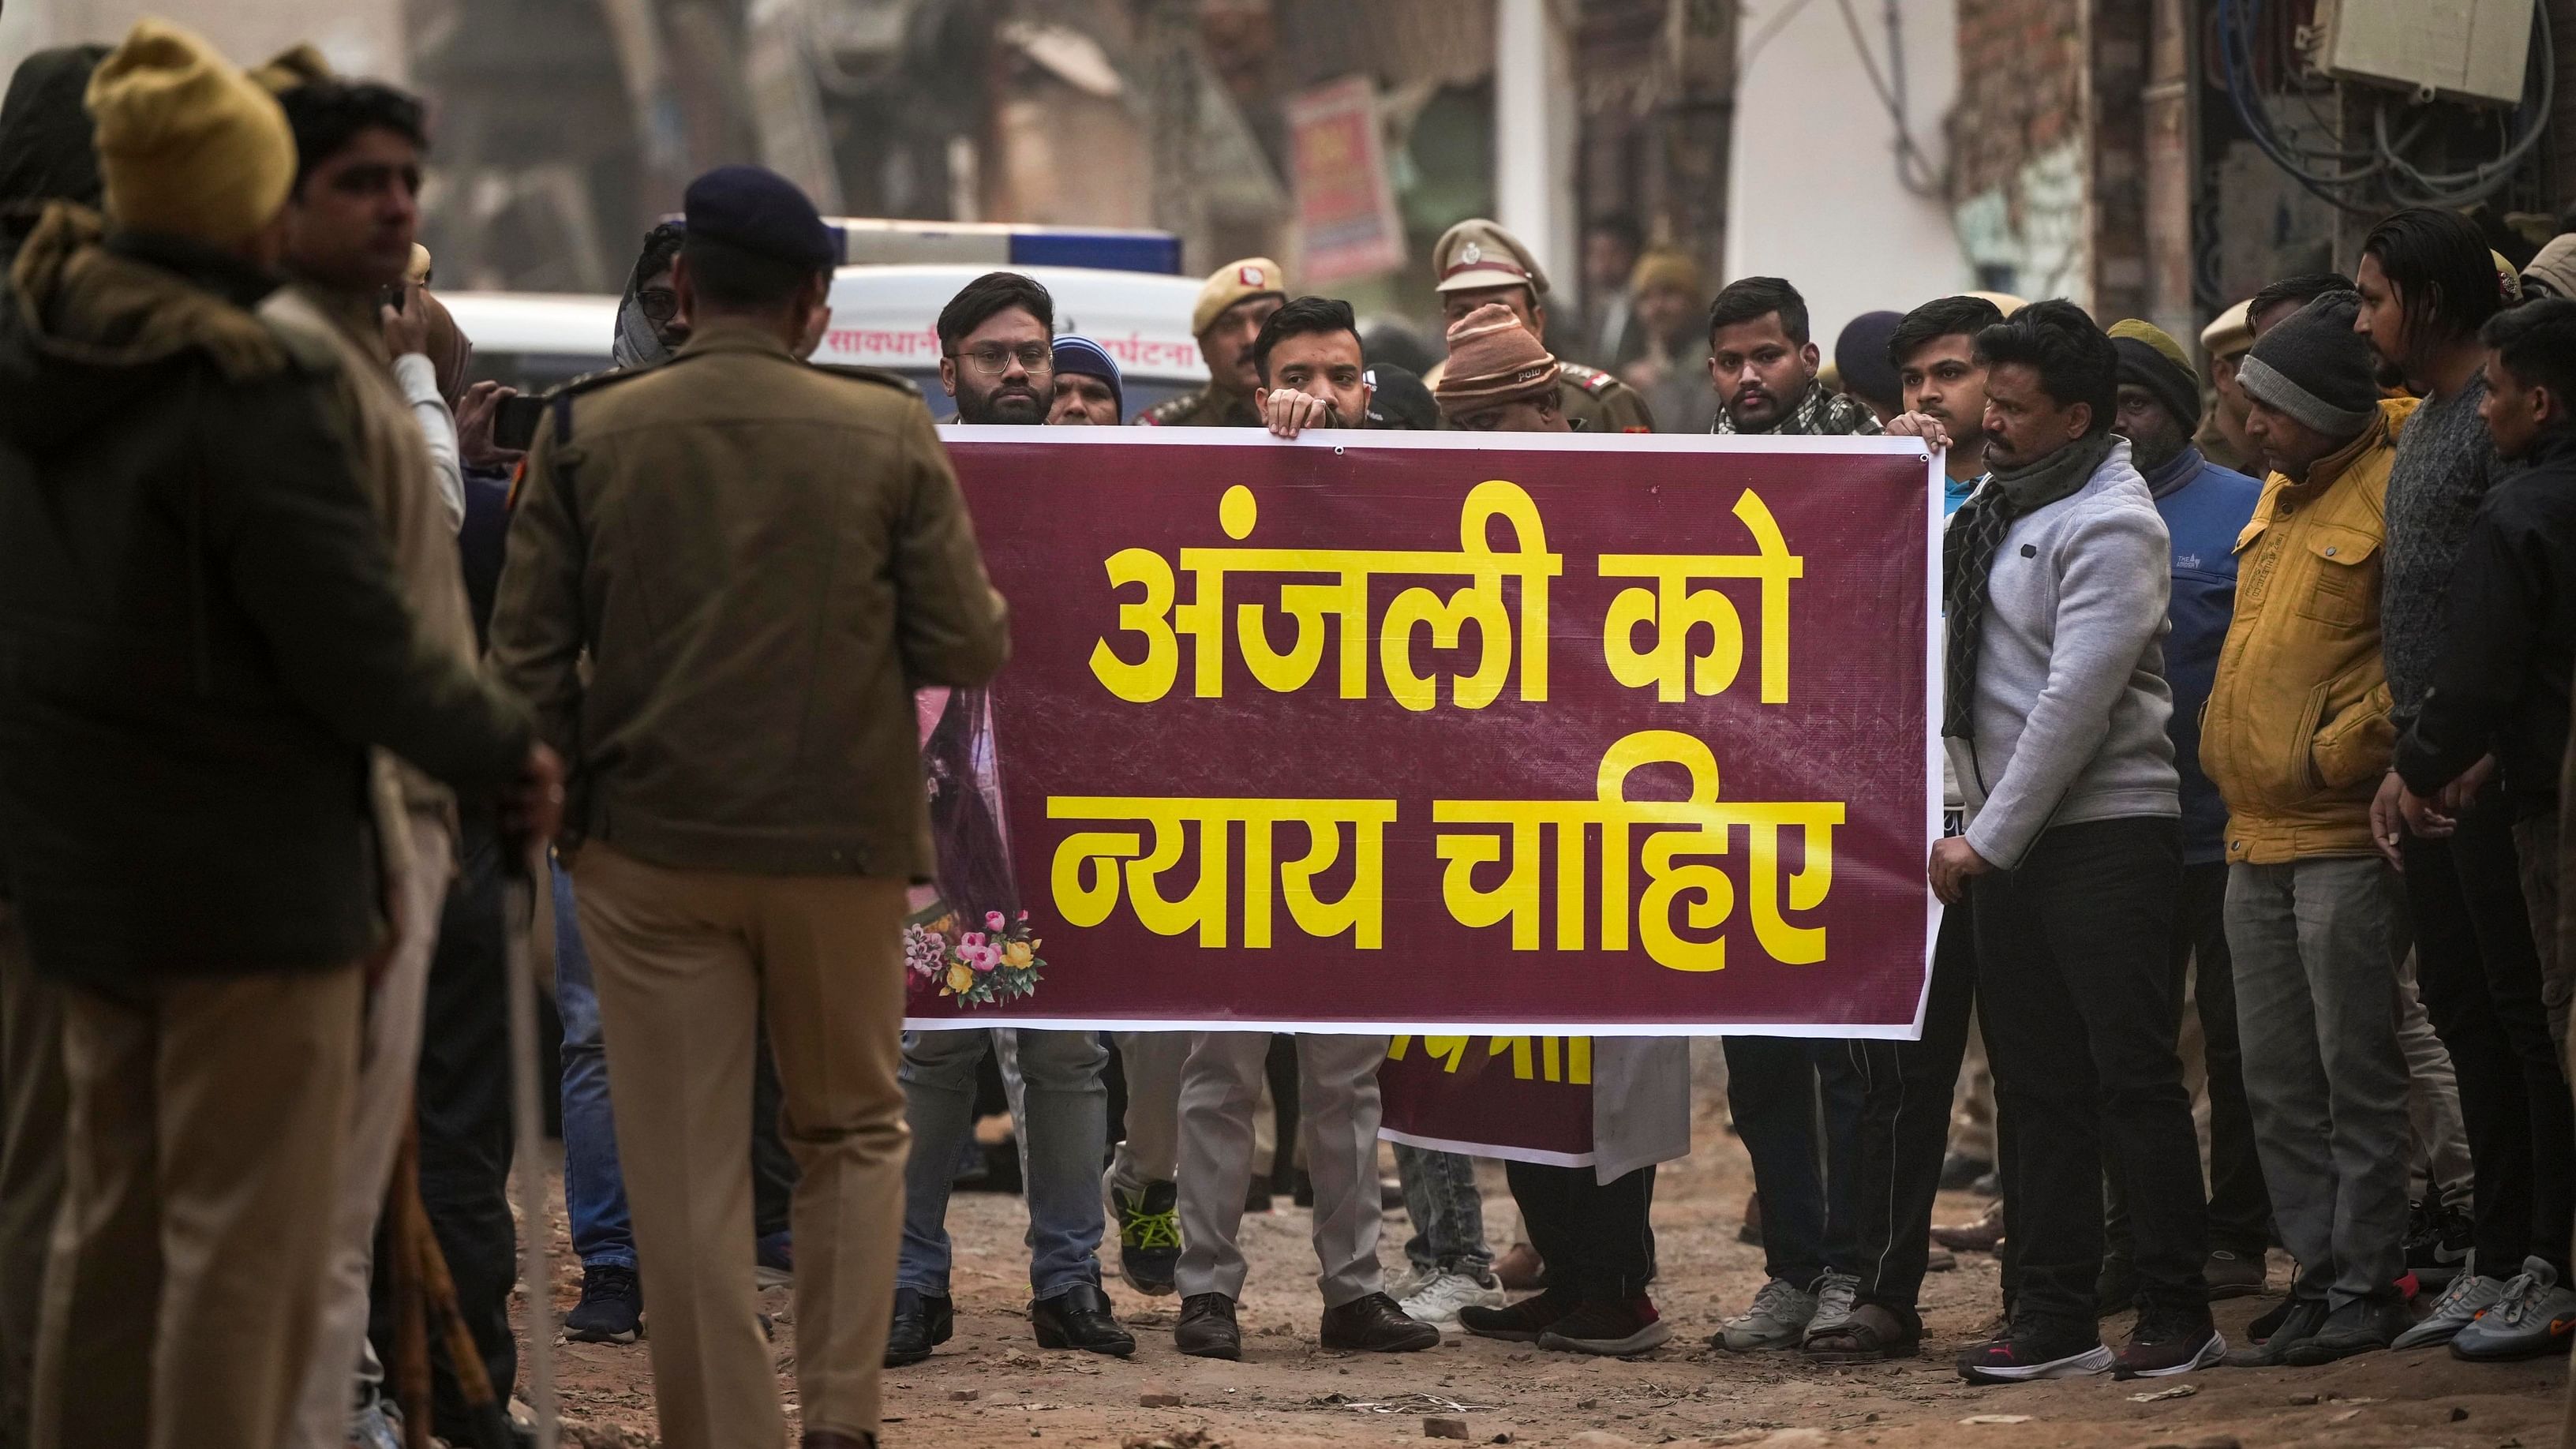 Locals protest demanding justice for the woman who was killed after being dragged by a car, at Karan Vihar area of Sultanpuri, in New Delhi, Tuesday, Jan. 3, 2023. Credit: PTI Photo